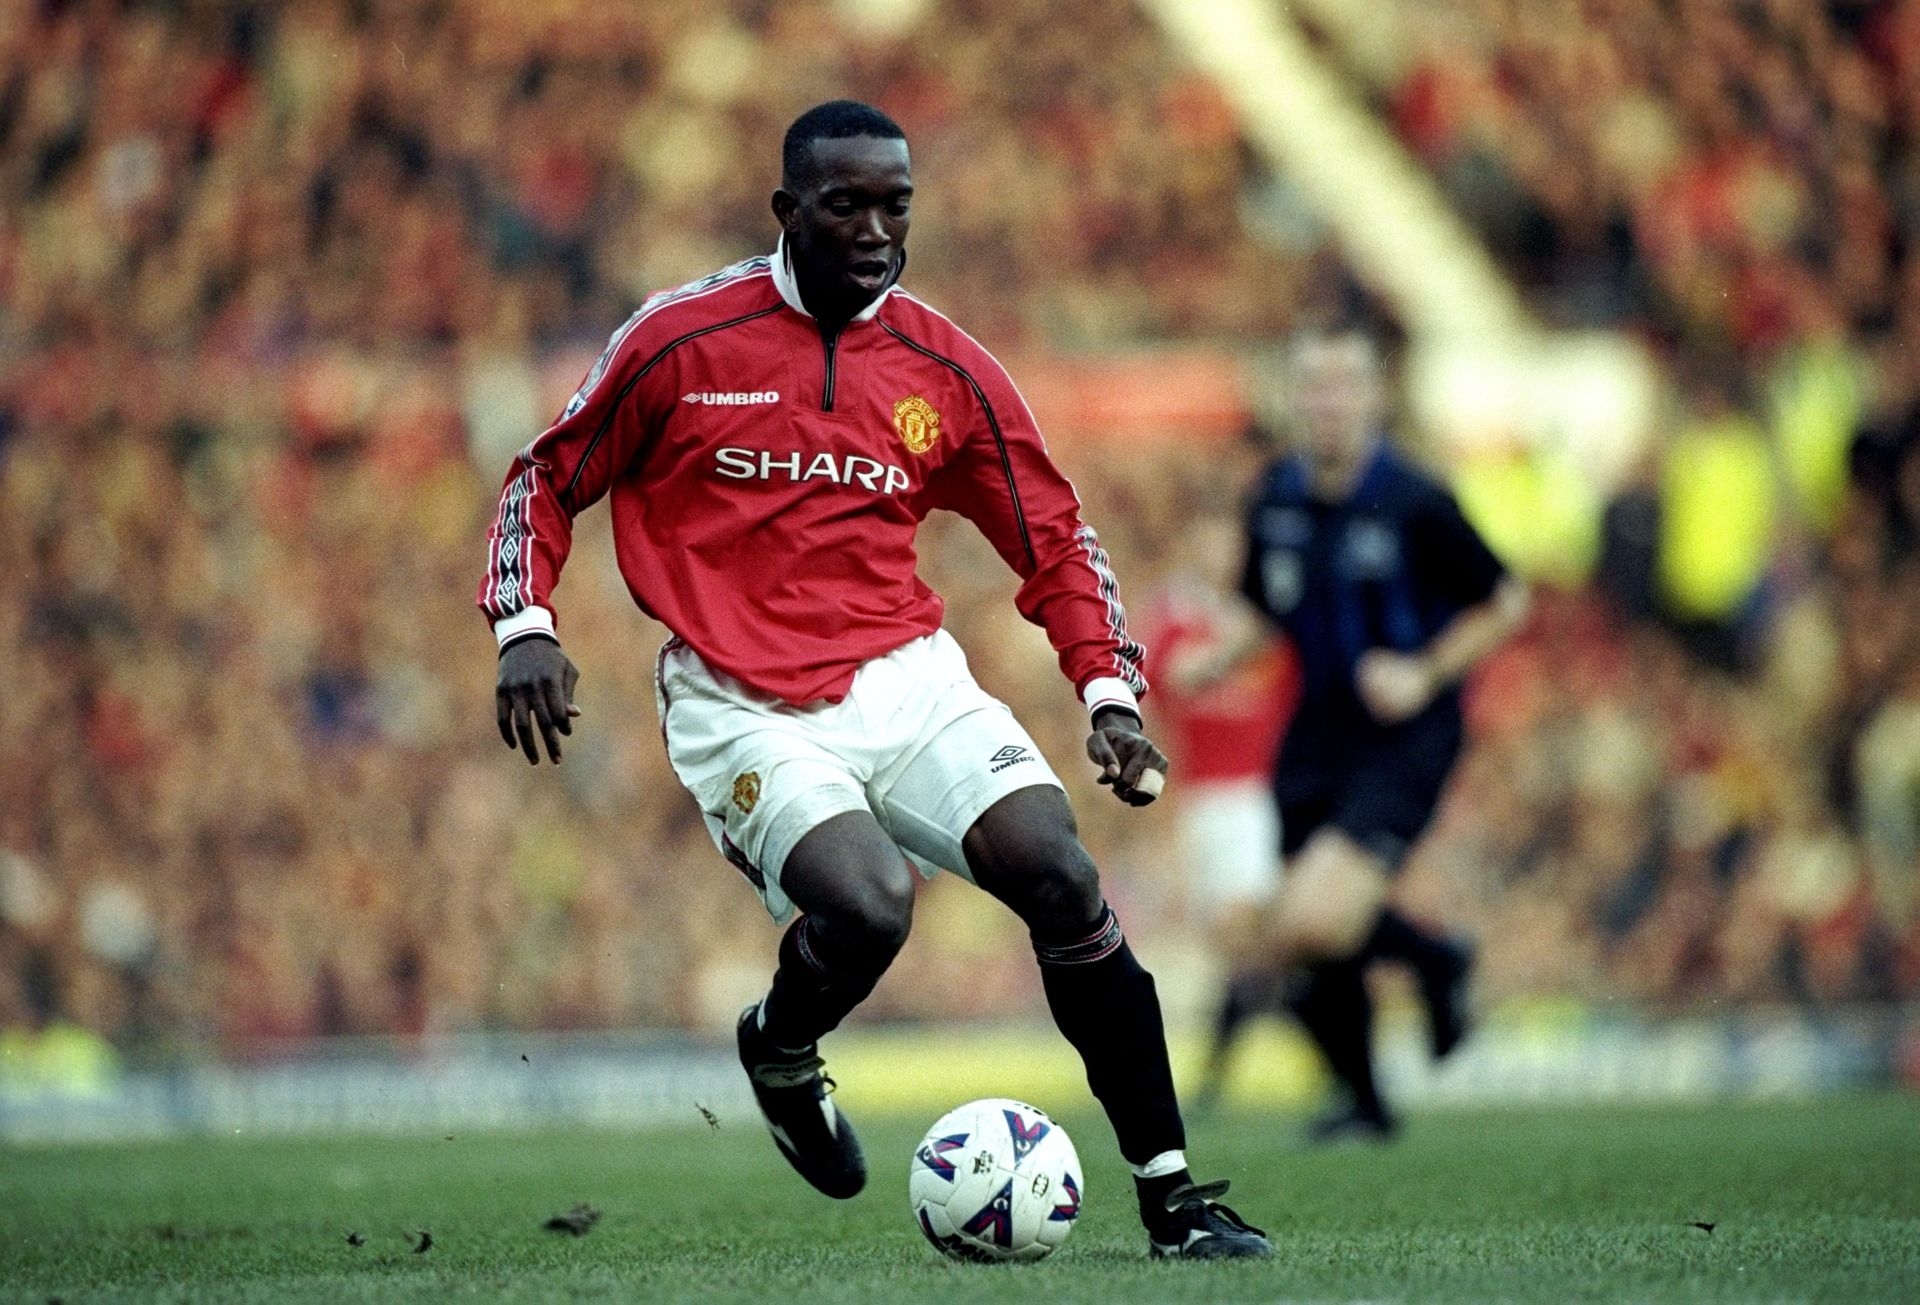 <p>                     Dwight Yorke was offered a trial at Aston Villa by Graham Taylor after the club's former manager spotted him in action on a tour of the West Indies.                   </p>                                      <p>                     After nine years at Villa Park, Yorke moved to Manchester United for a fee of £12.6 million (around €19.5m) in 1998 and formed an exciting partnership with Andy Cole as the Red Devils won the treble in his first season. After 65 goals in 152 games, Yorke joined Blackburn Rovers in 2002.                   </p>